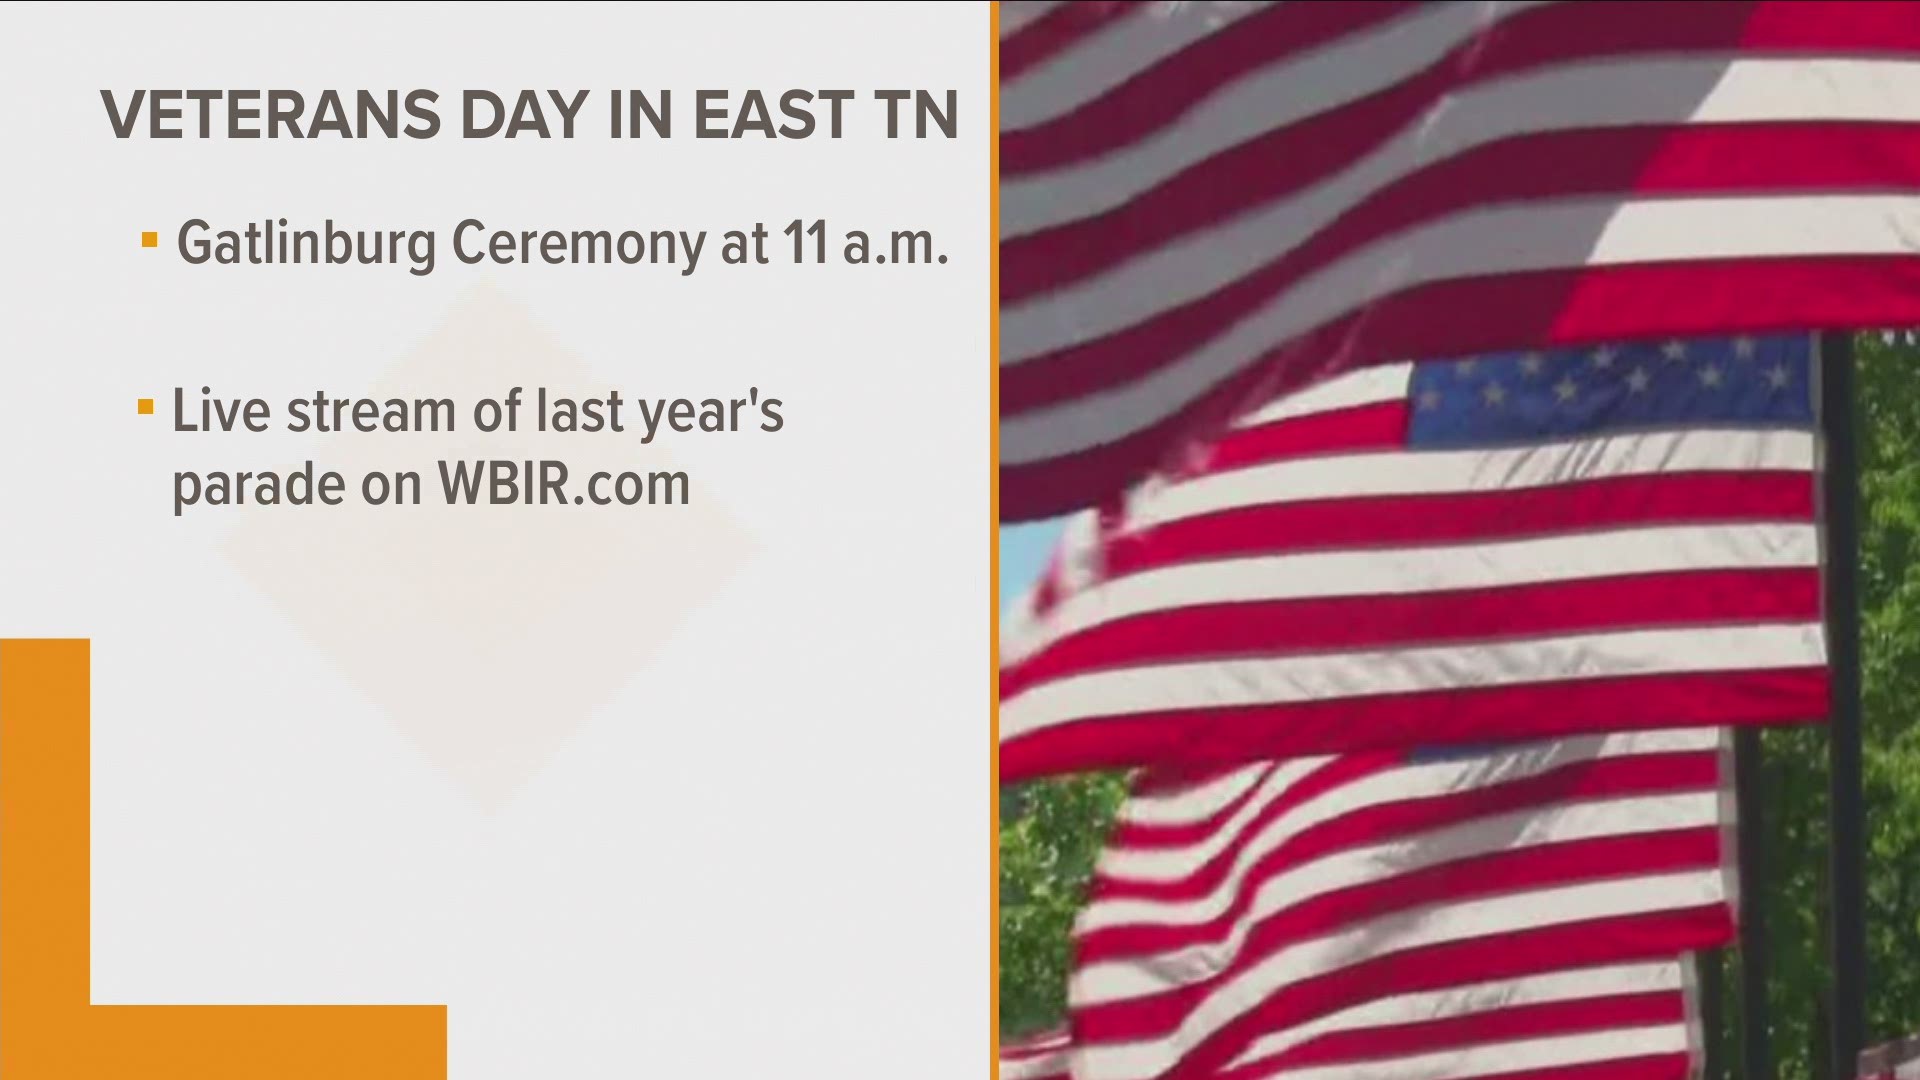 Here's how local veterans will be honored in East Tennessee.